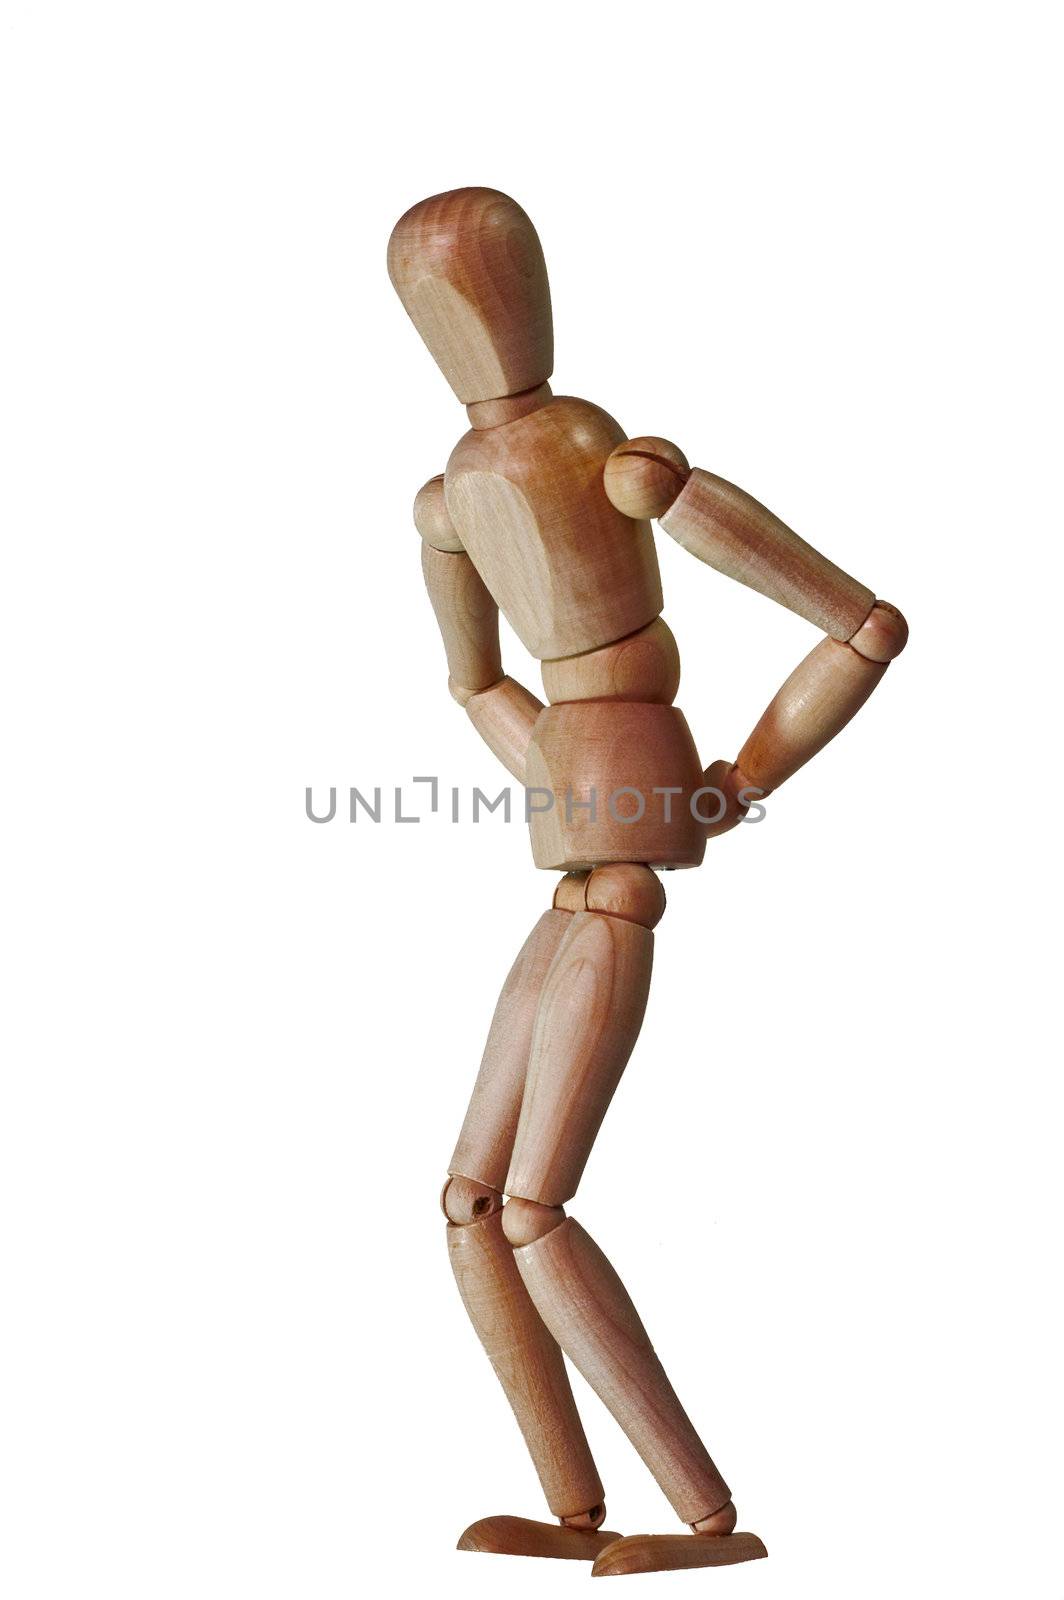 Wooden puppet set as someone with a back pain. White background with no shadow.